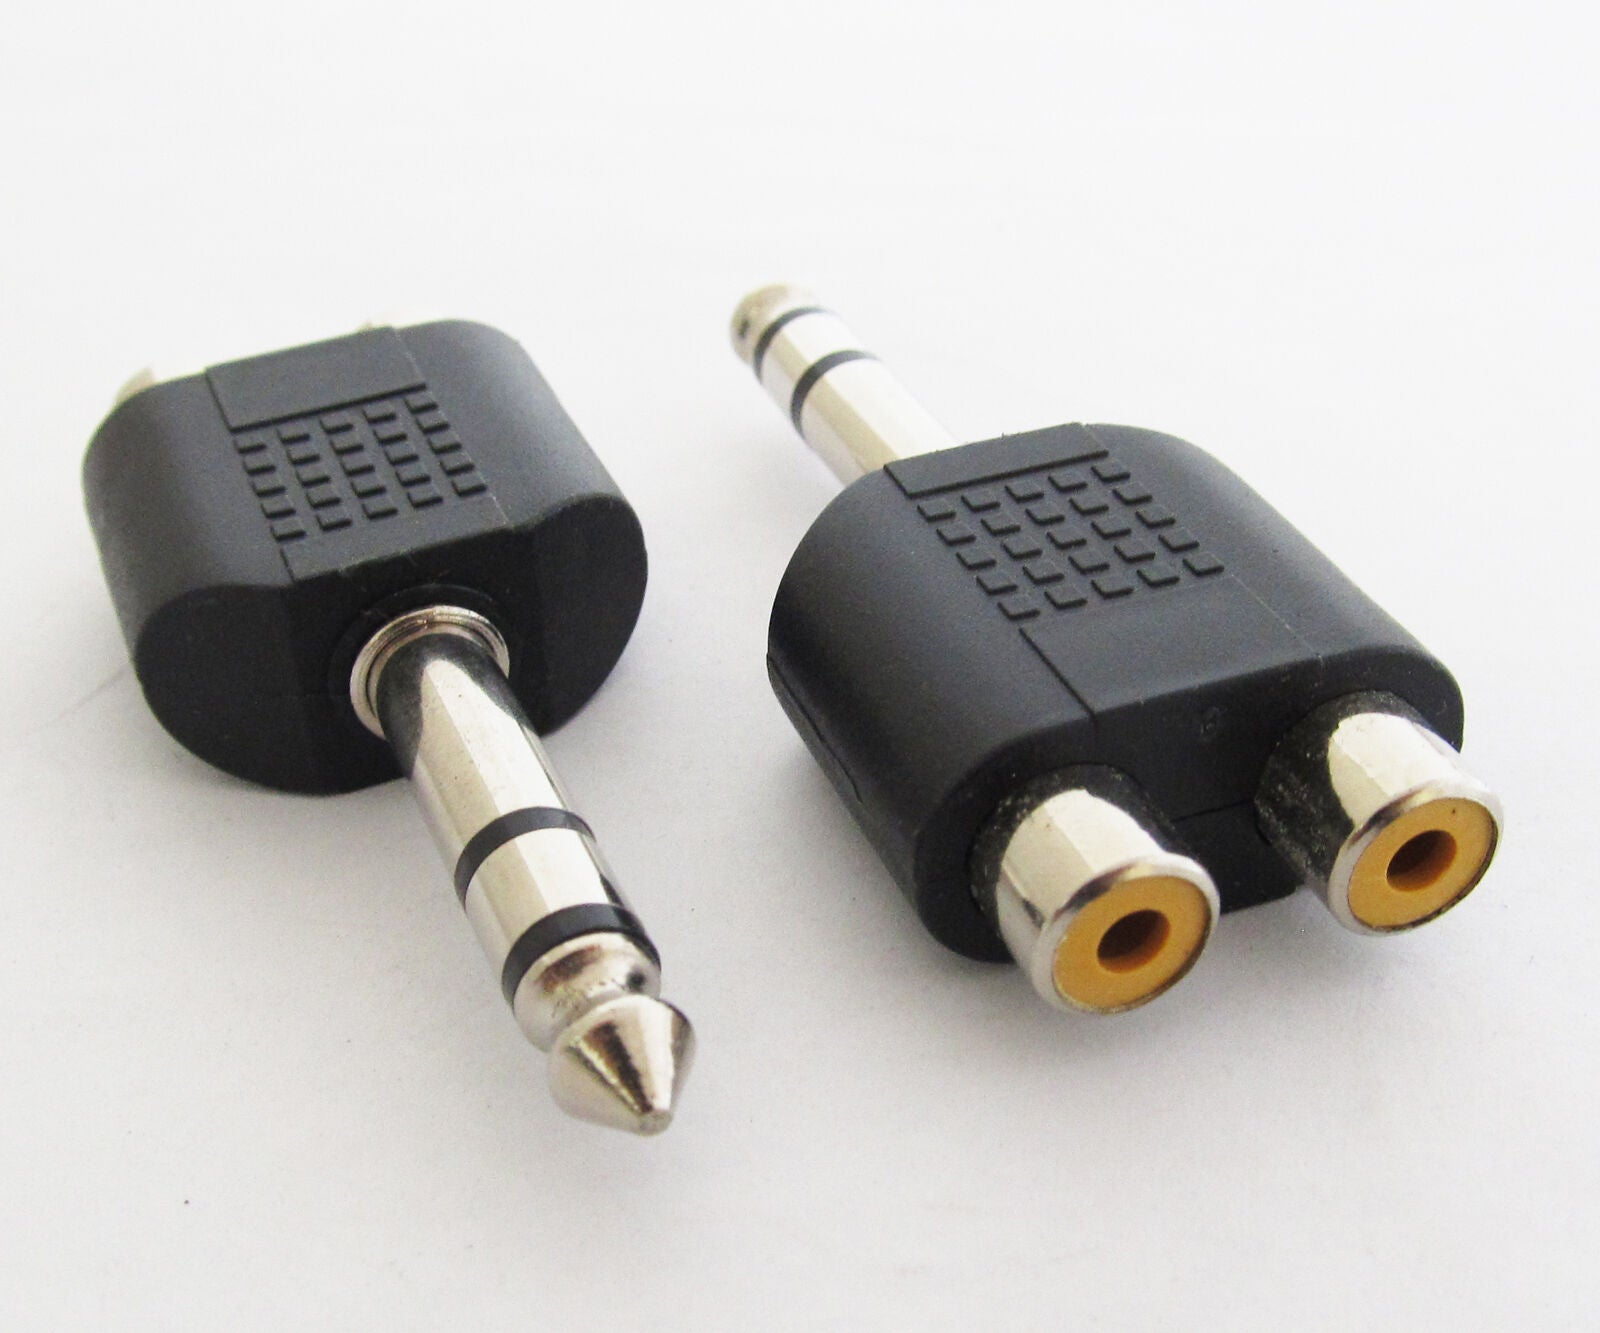 100pcs 1/4" 6.35mm Stereo Male to 2 Dual Phono RCA Female Jack Adapter Converter